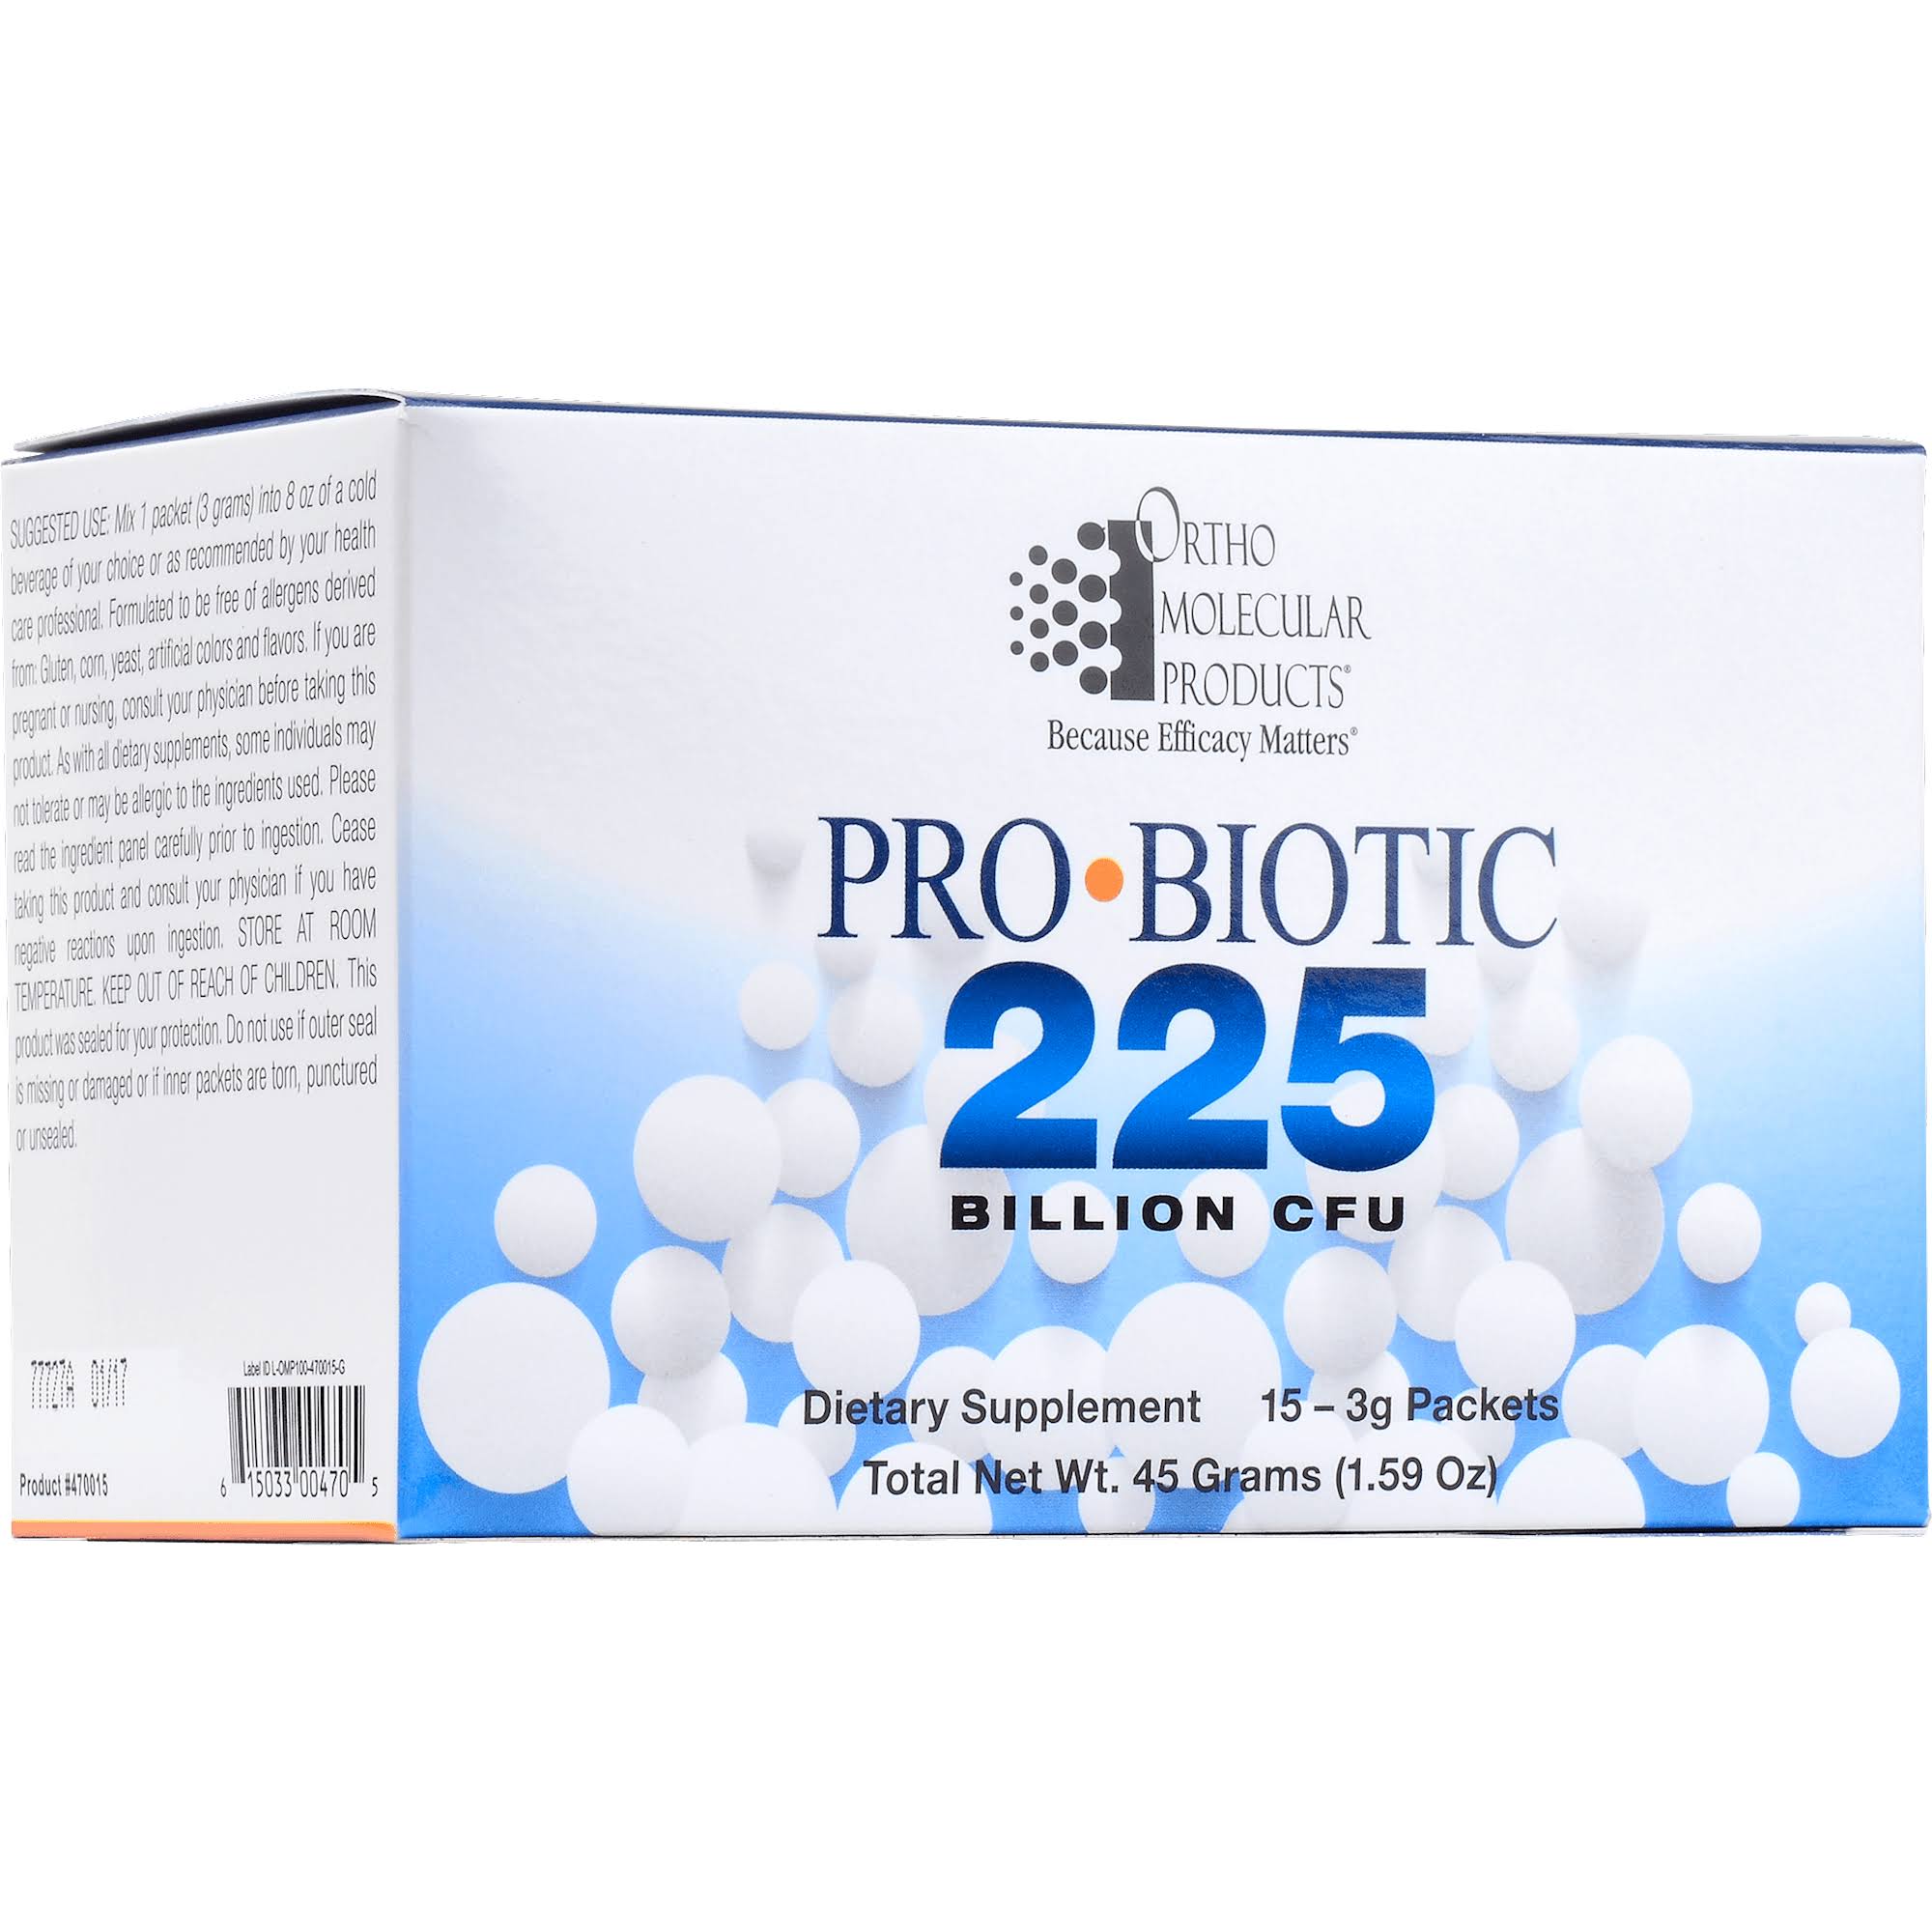 Ortho Molecular Products Probiotic 225 - 15-3g Packets